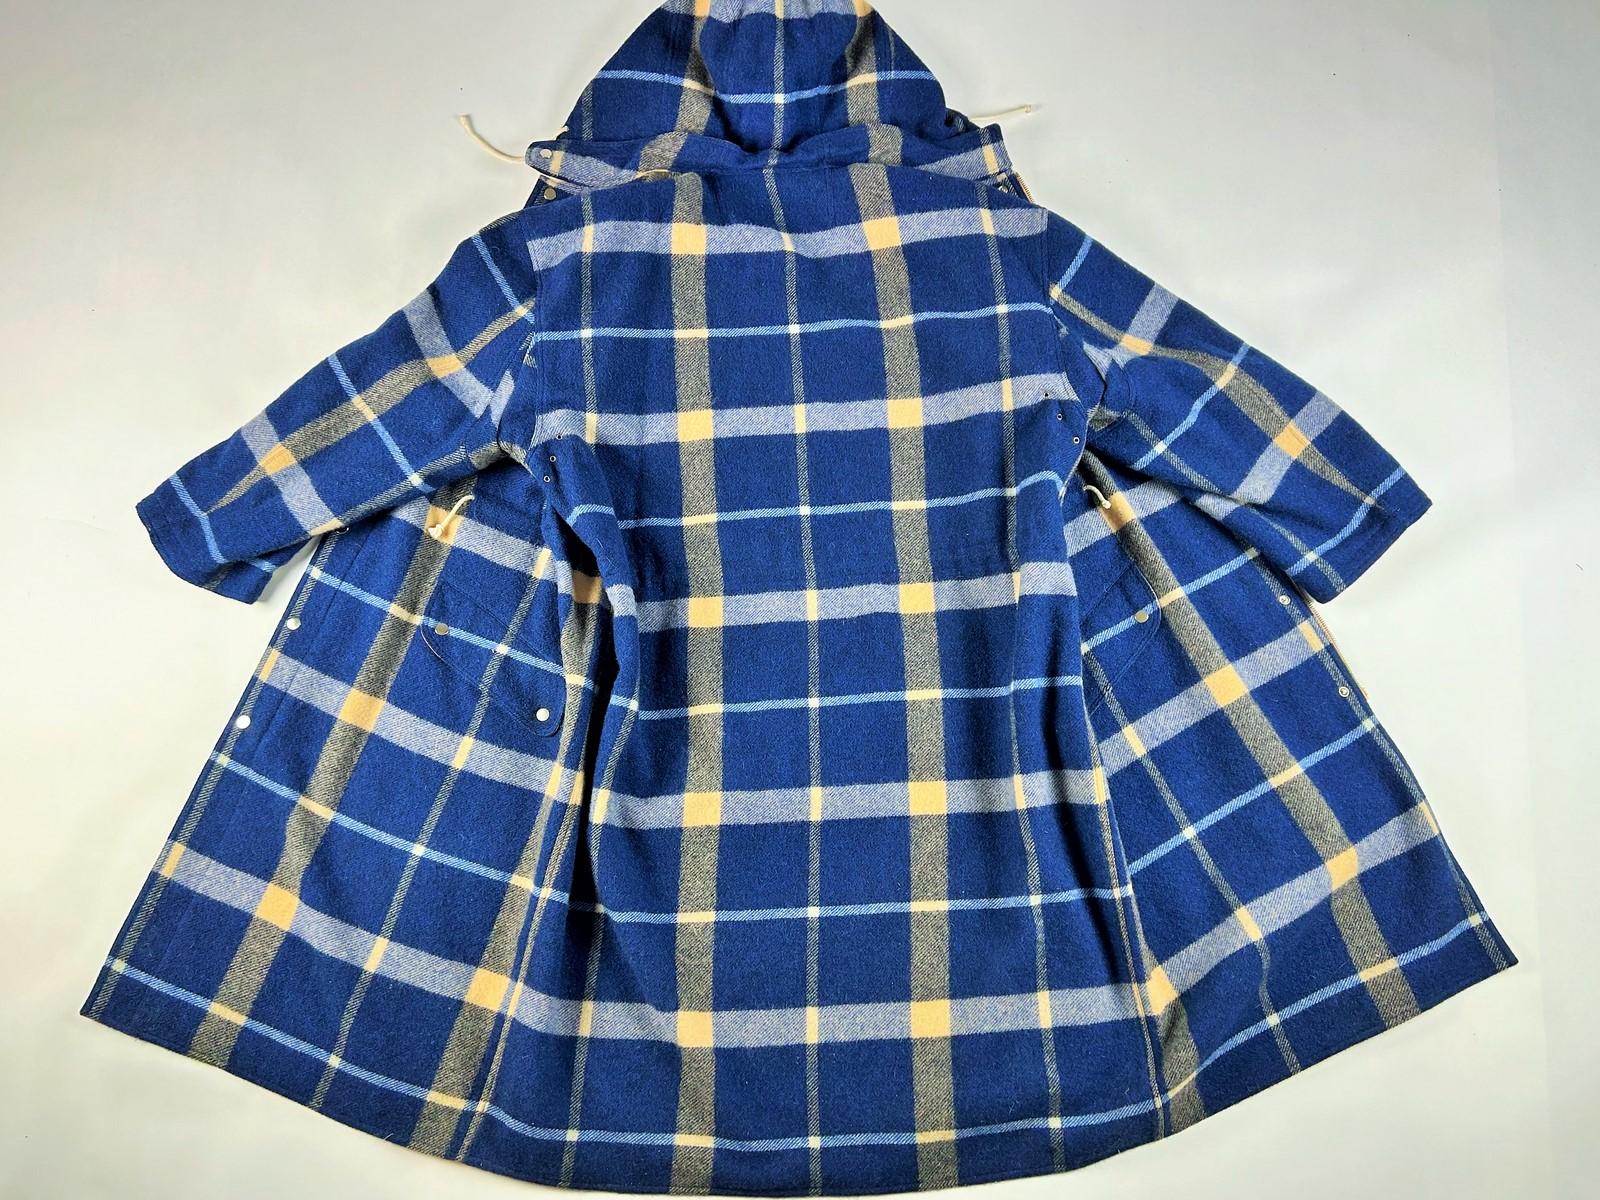 A Men's Wool Tartan Trenchcoat by André Courrèges - France Circa 2000 For Sale 11